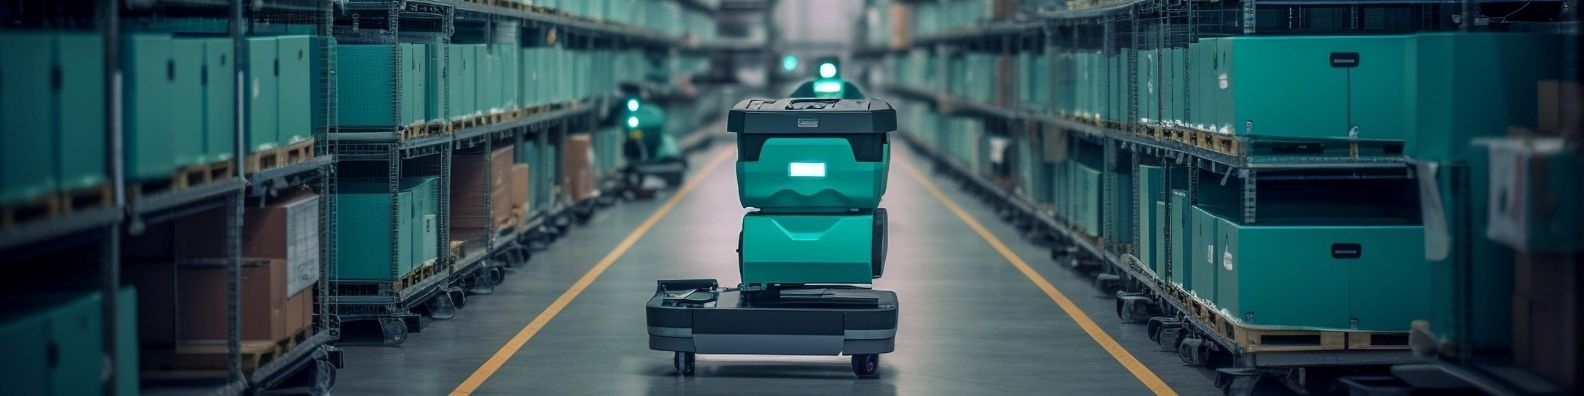 Automated Storage and Retrieval Systems (ASRS): Revolutionising Manufacturing, Warehousing and Distribution